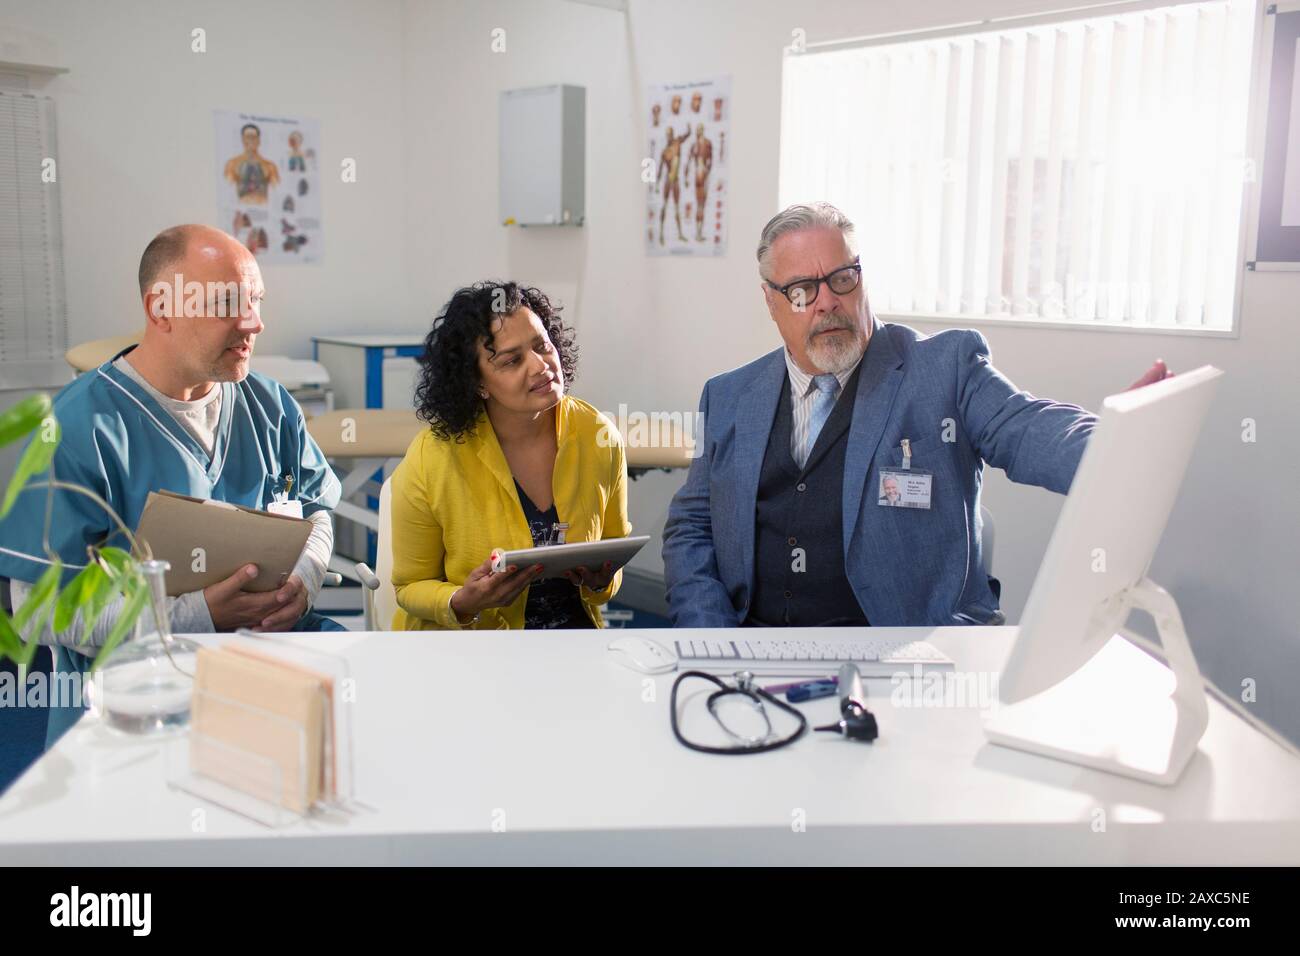 Doctors and administrator meeting at computer in doctors office Stock Photo